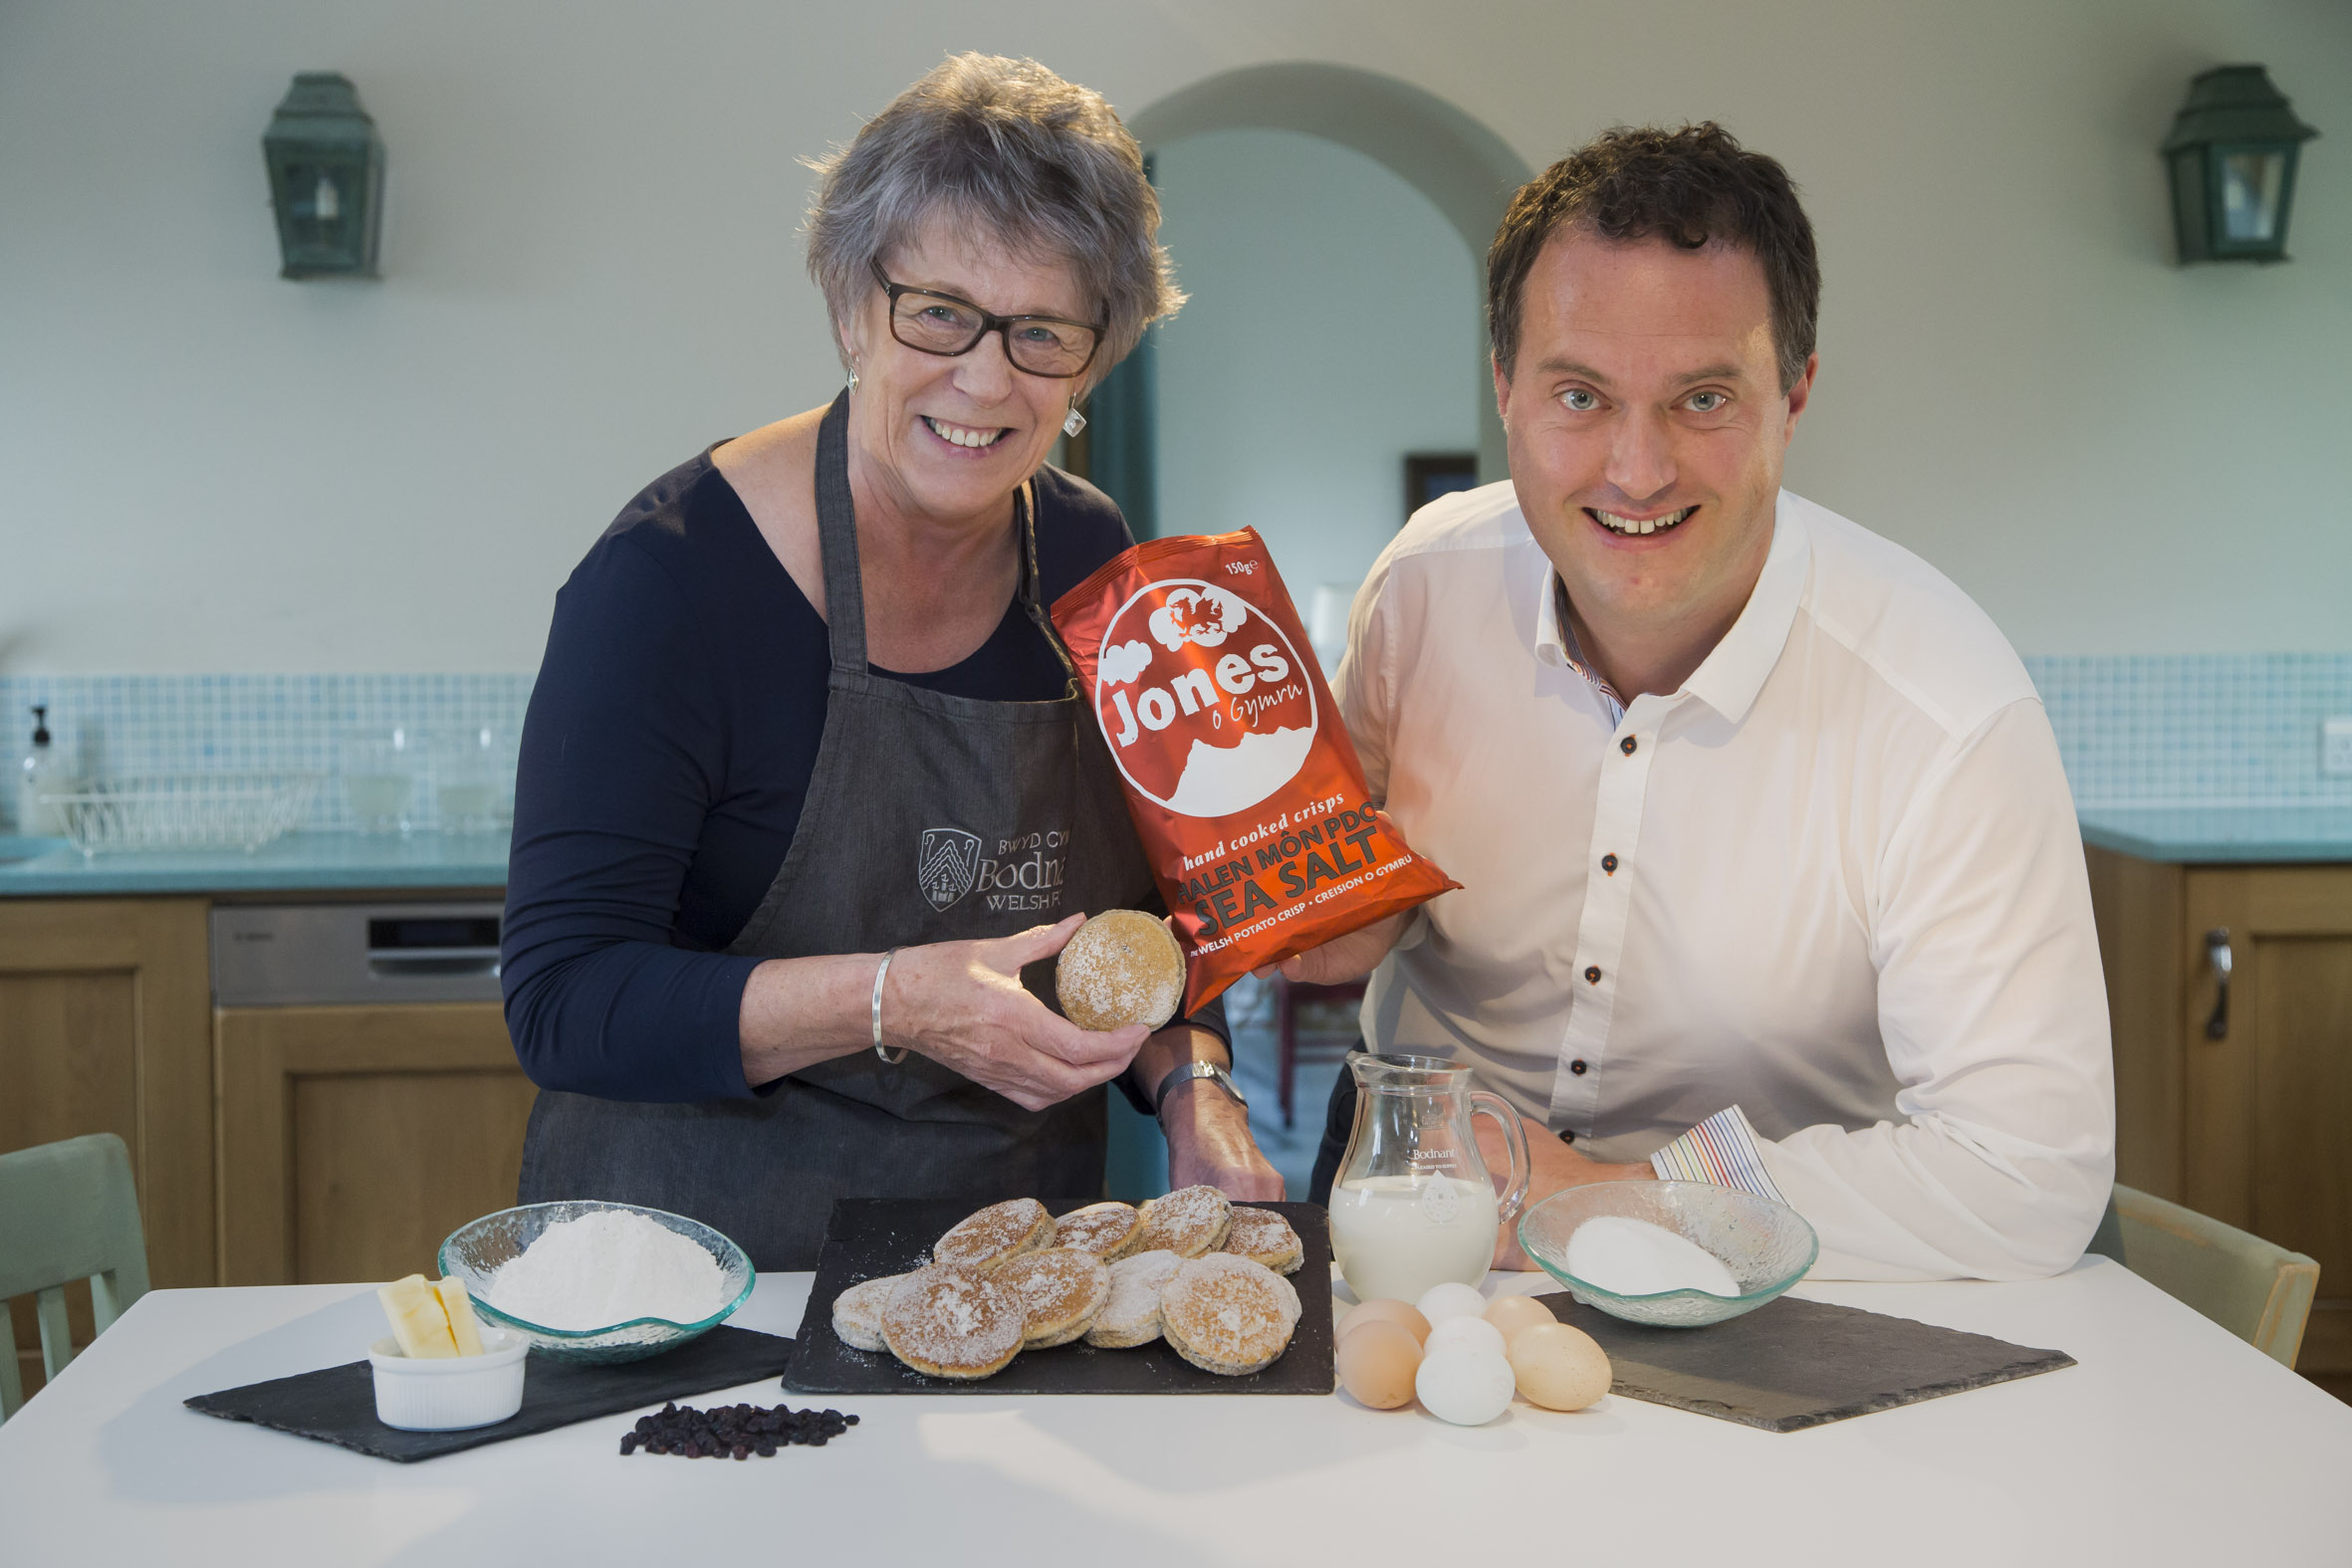 Hunt is on for first world Welsh Cake Champion